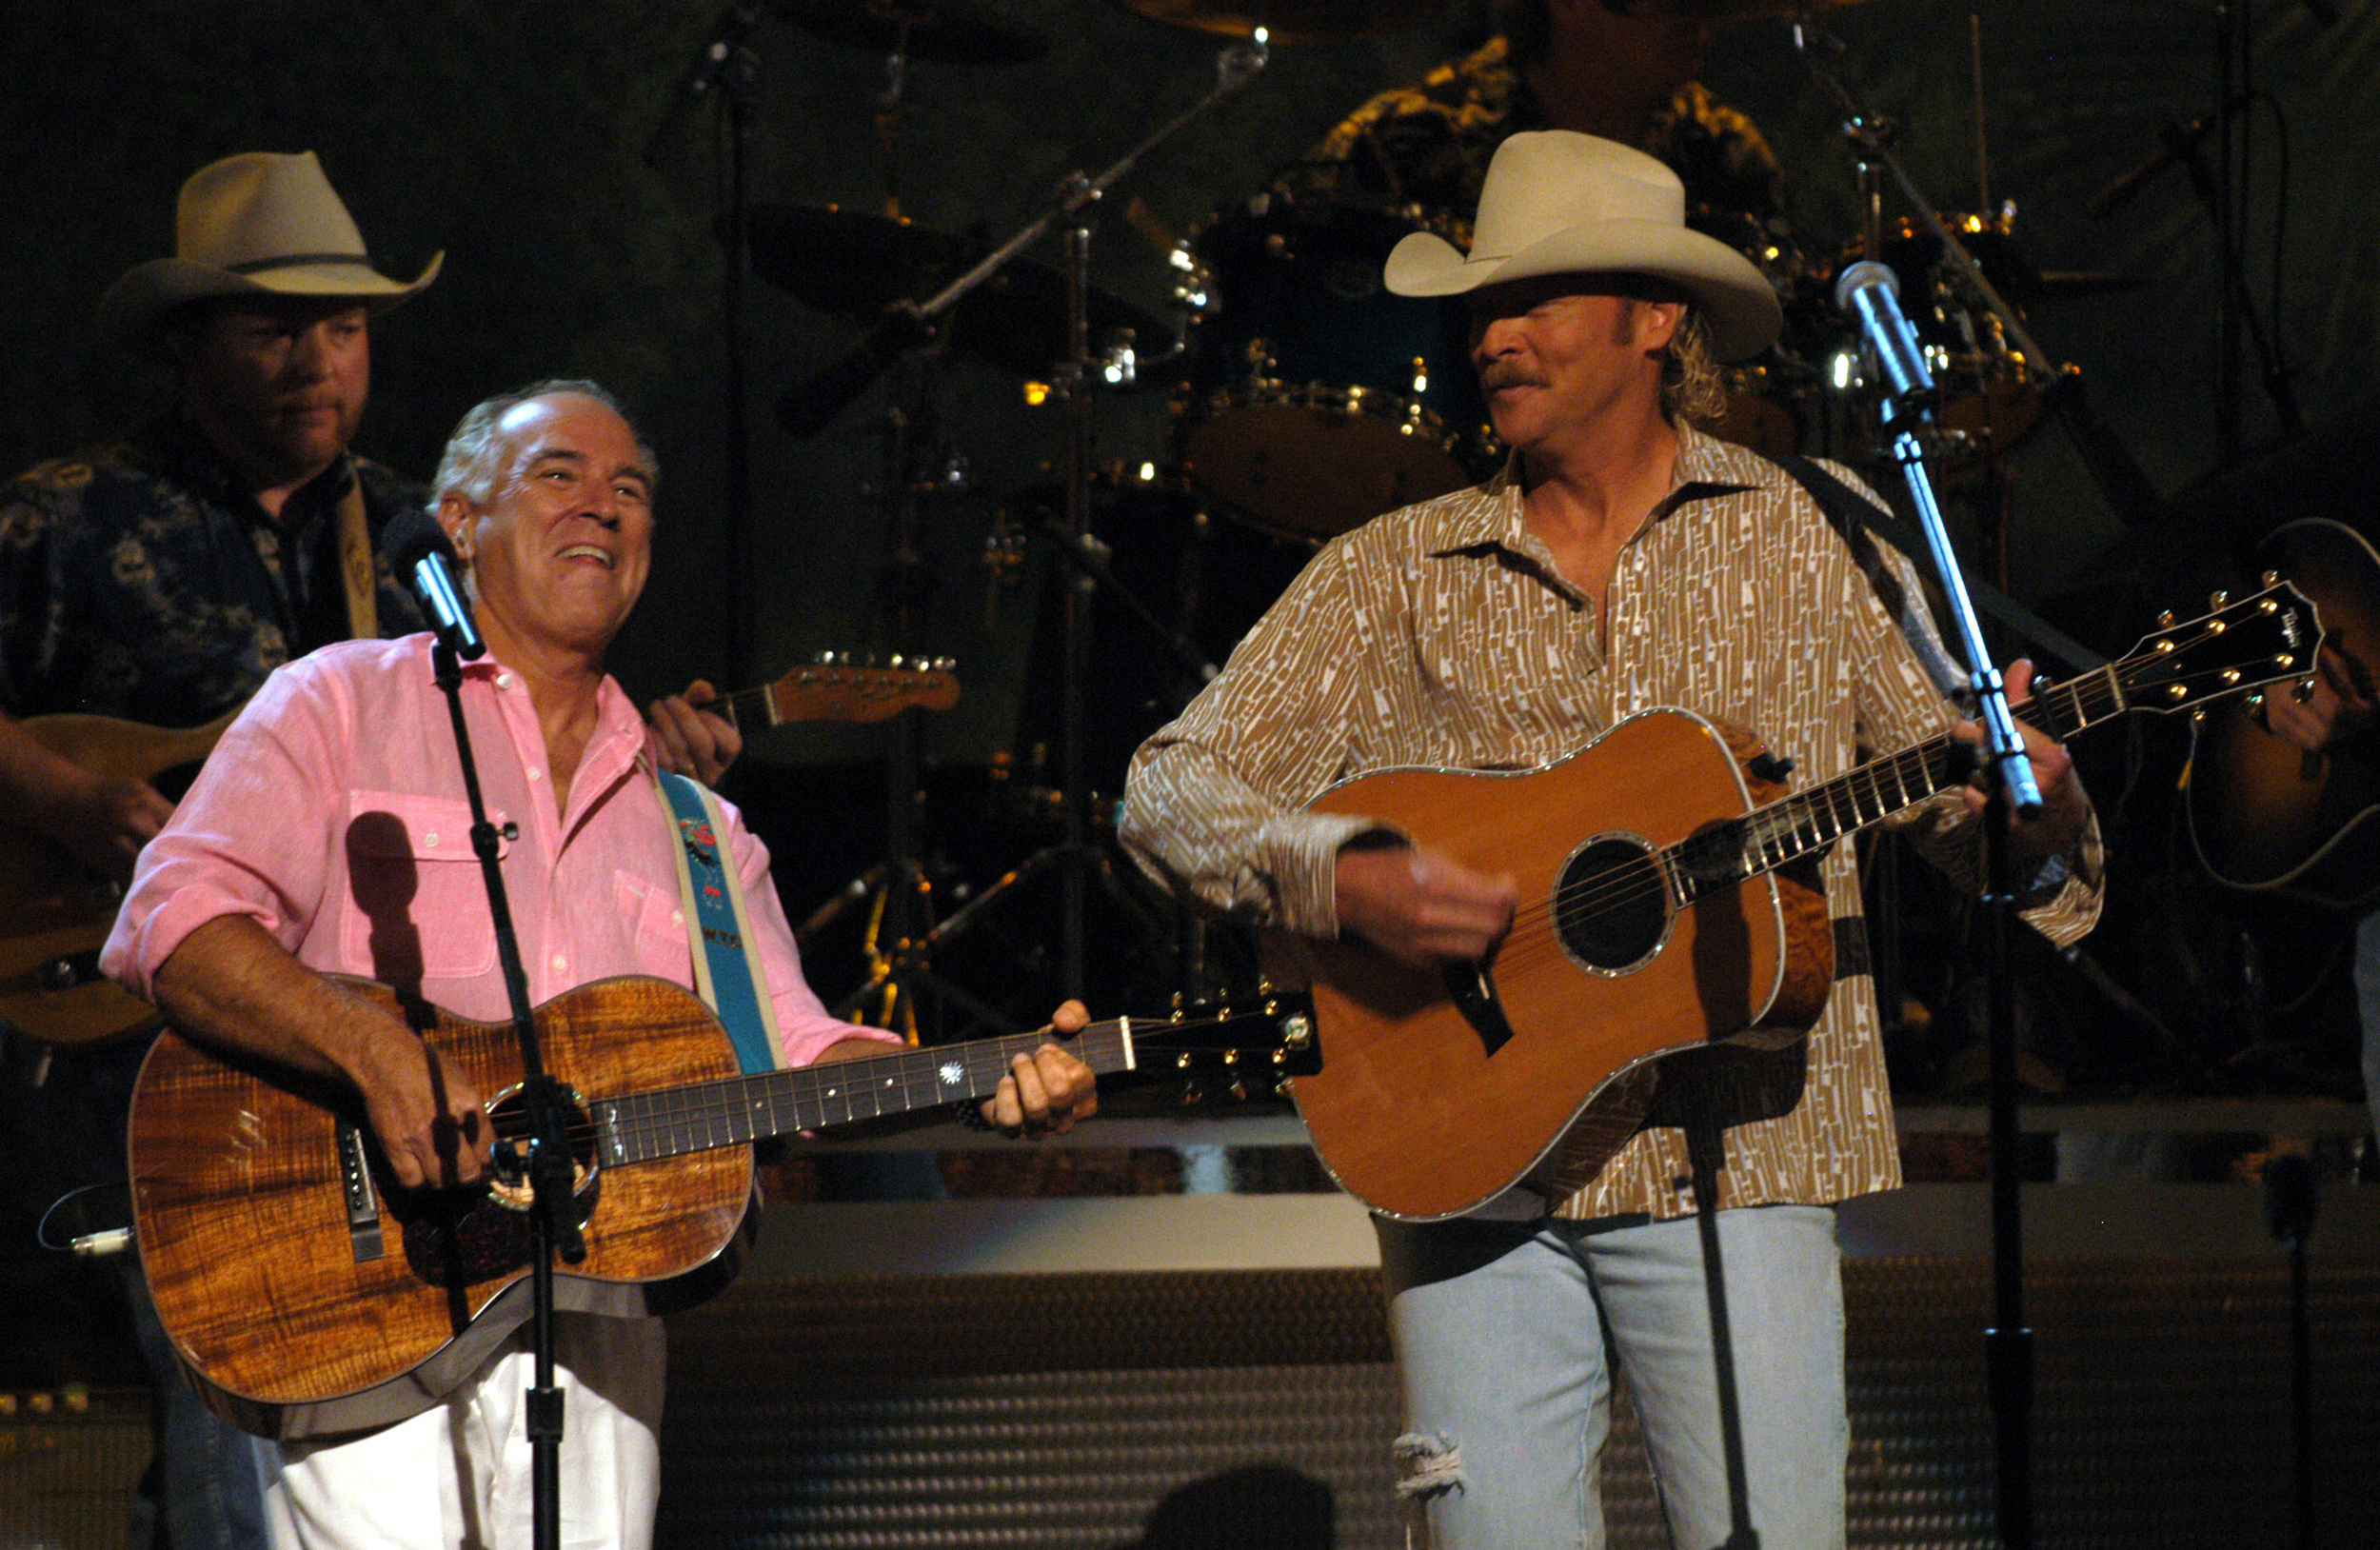 <p>Margaritaville mogul Jimmy Buffett and Alan Jackson teamed up in 2003 to record this legendary, island-inspired ode to day drinking. It was a massive crossover success for Jackson, charting at #17 on the all-genre Billboard Hot 100, and won the CMA Award that same year for Vocal Event of the Year. </p><p>You may also like: <a href='https://www.yardbarker.com/entertainment/articles/20_songs_that_should_have_won_a_grammy/s1__25413923'>20 songs that should have won a Grammy</a></p>